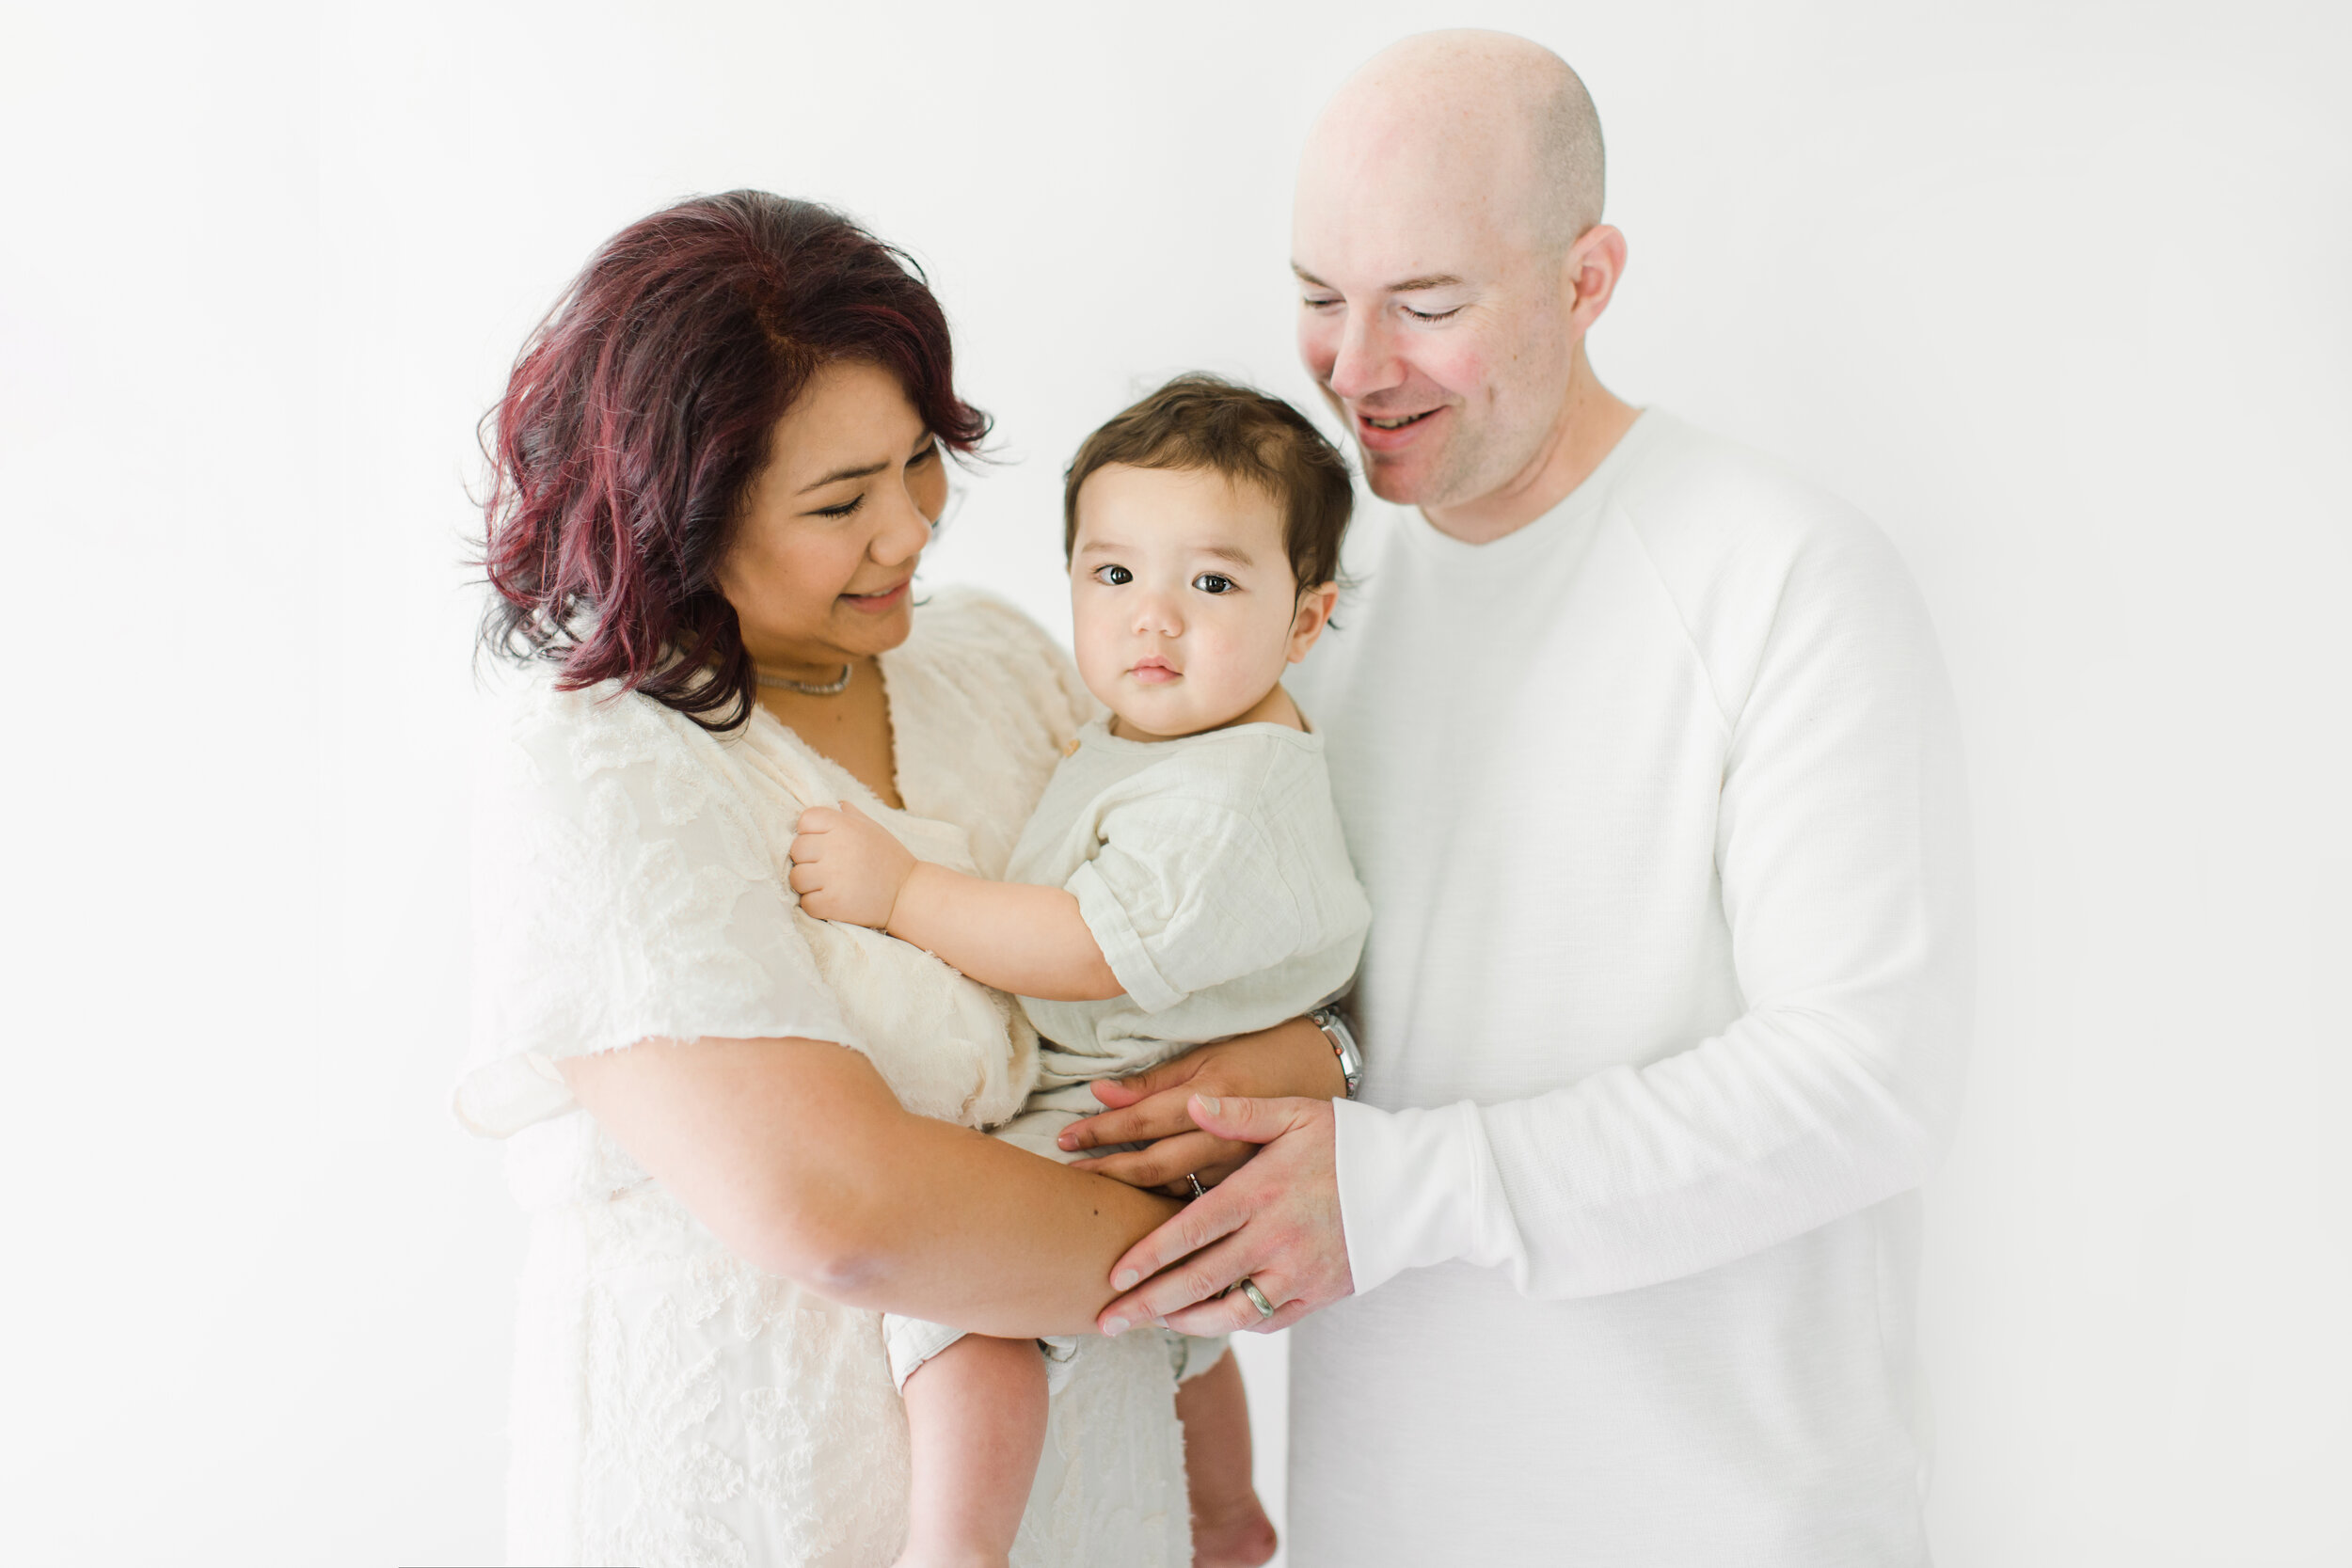 Family Photo Session for Baby's First Birthday